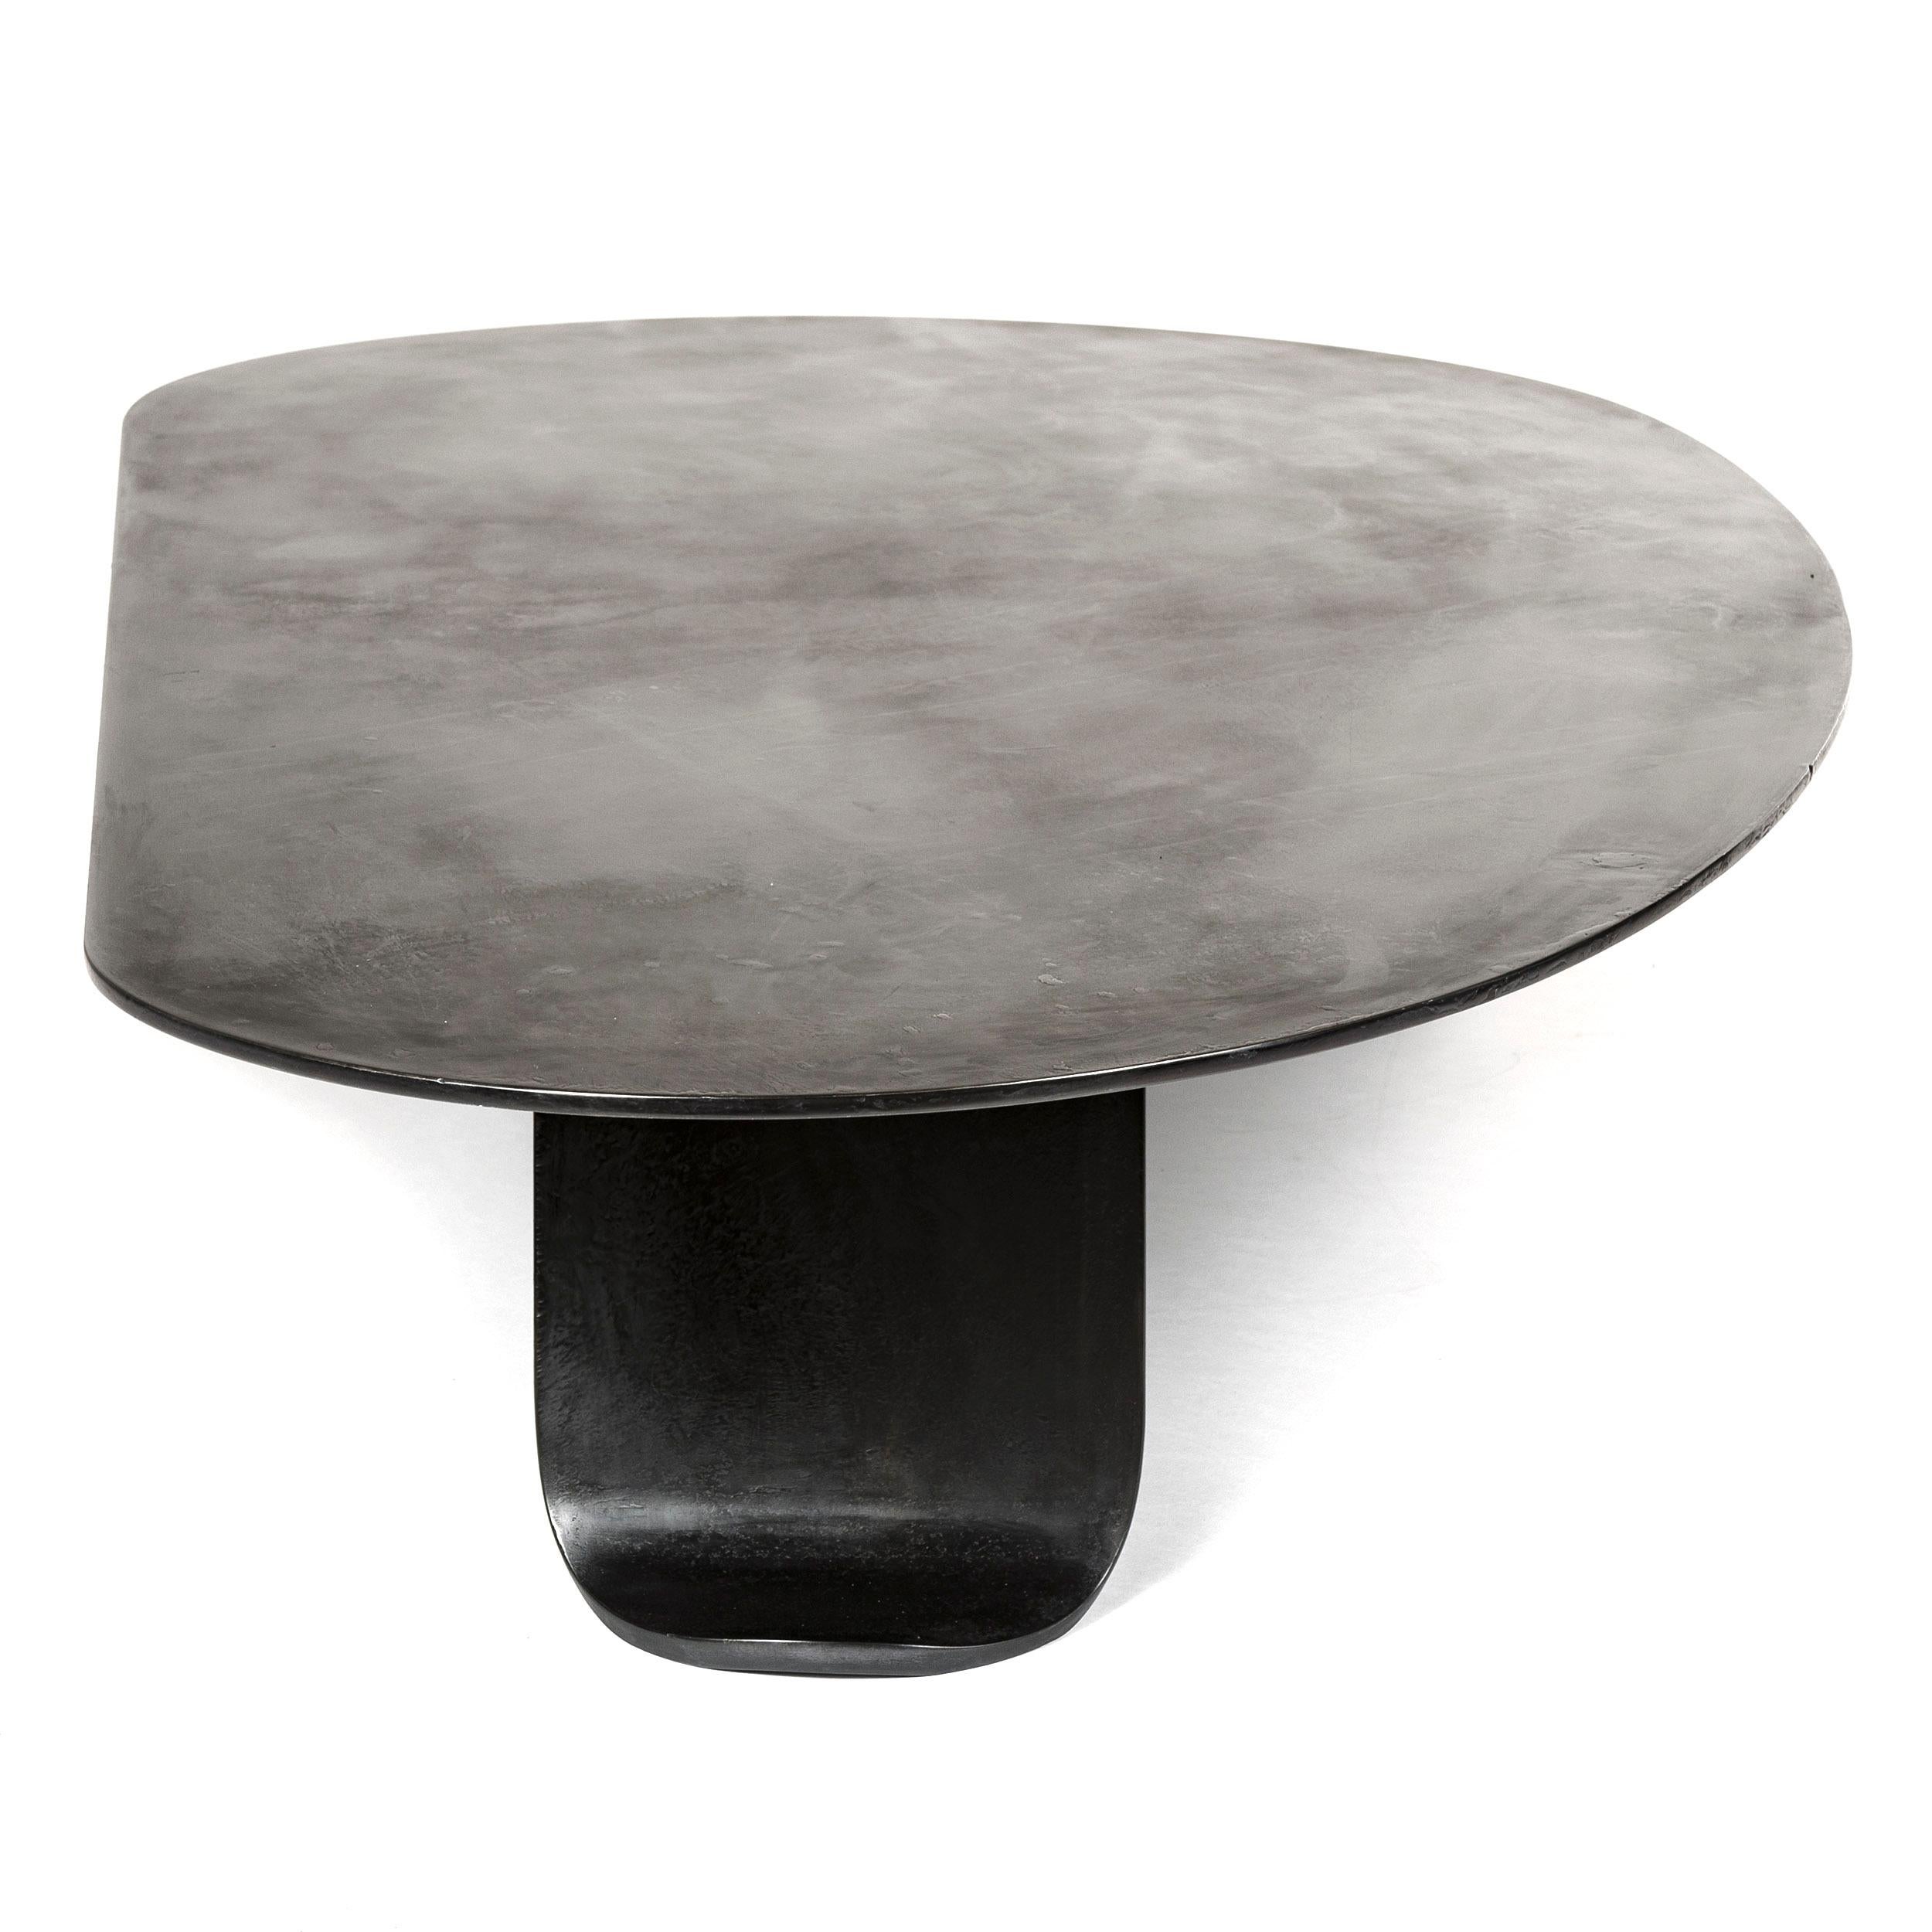 WYETH Chrysalis Table No. 1 in Patinated Steel with Hot Zinc Finish For Sale 1